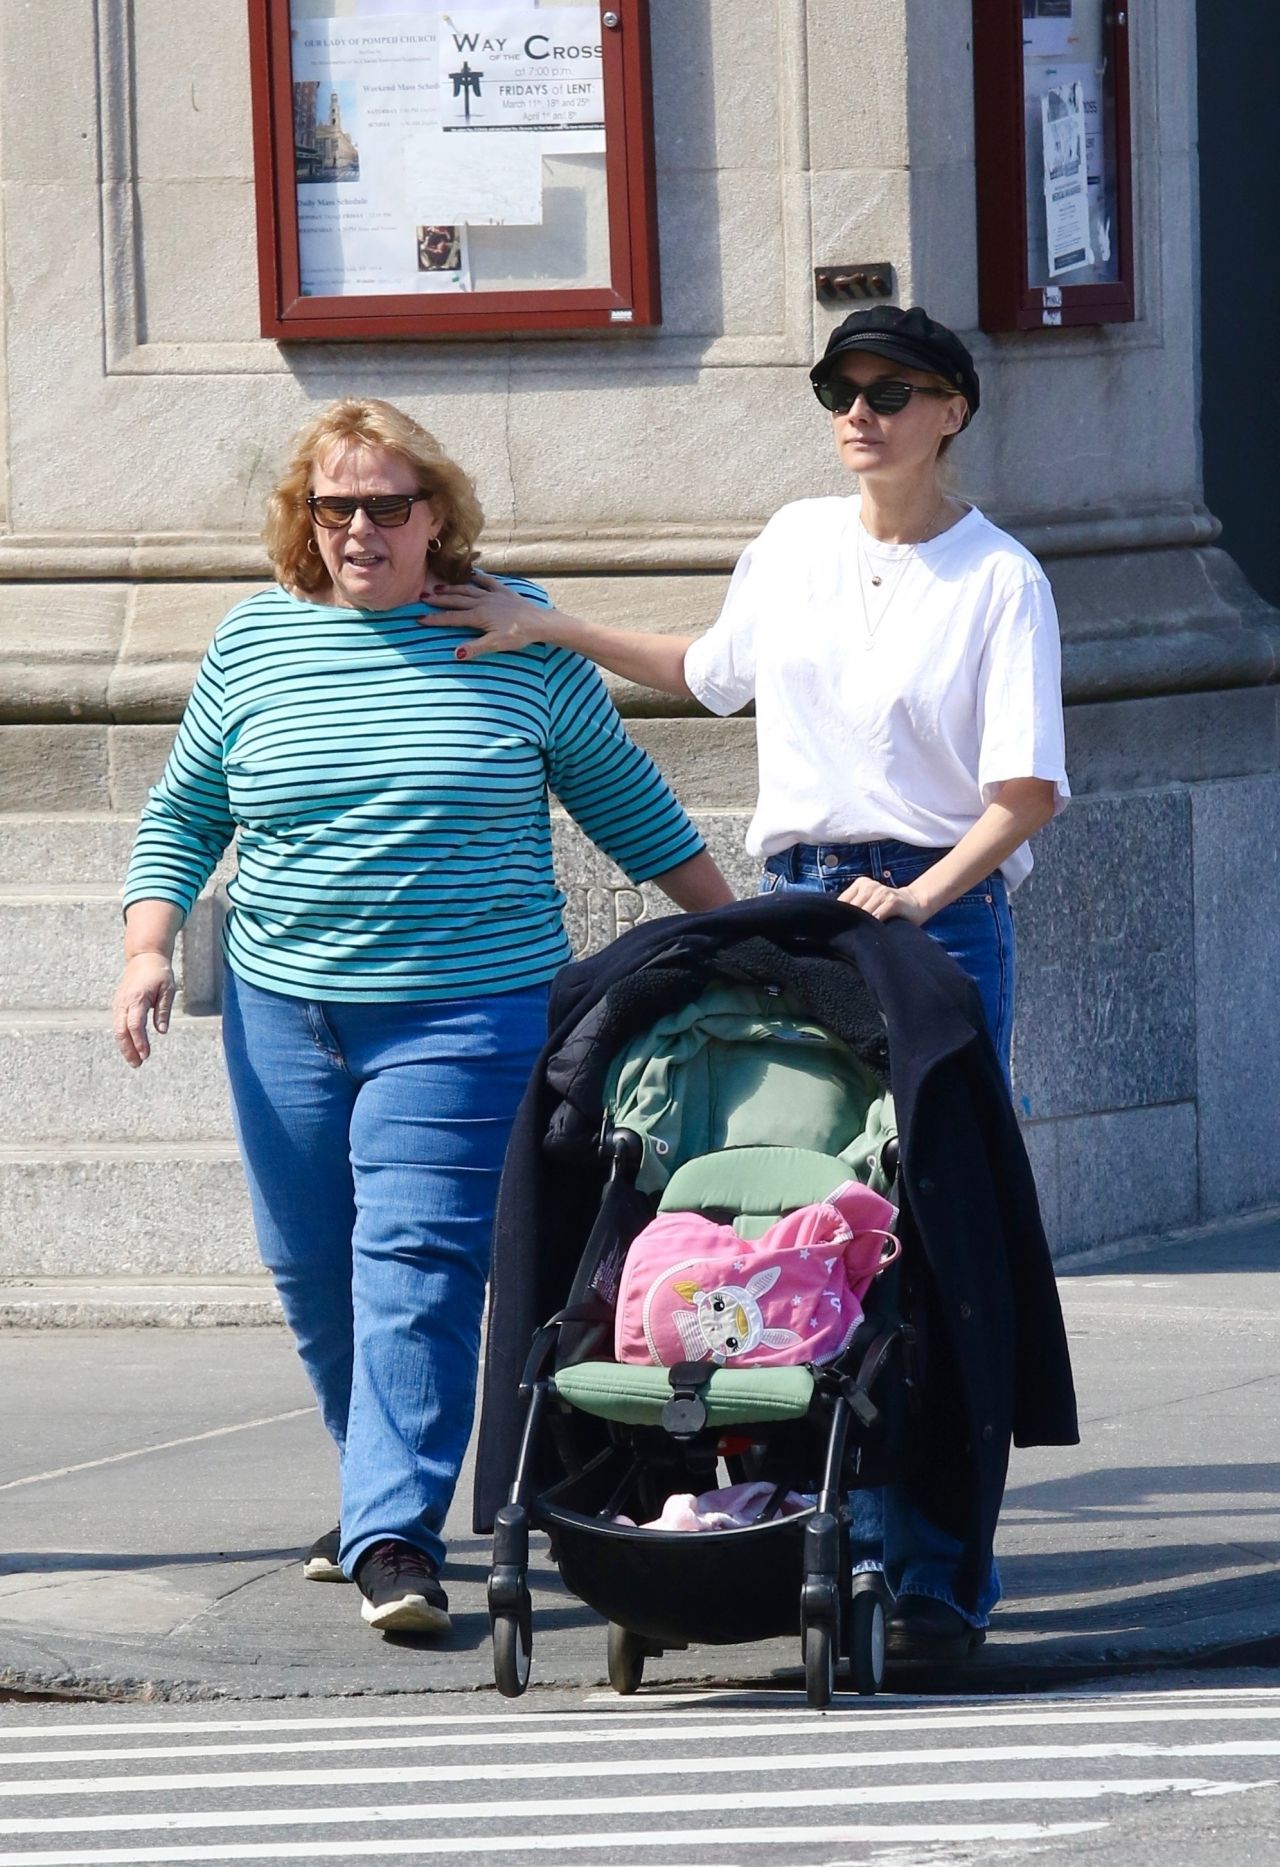 diane-kruger-and-mom-donate-baby-clothing-to-a-thrift-shop-in-ny-04-08-2022-6.jpg